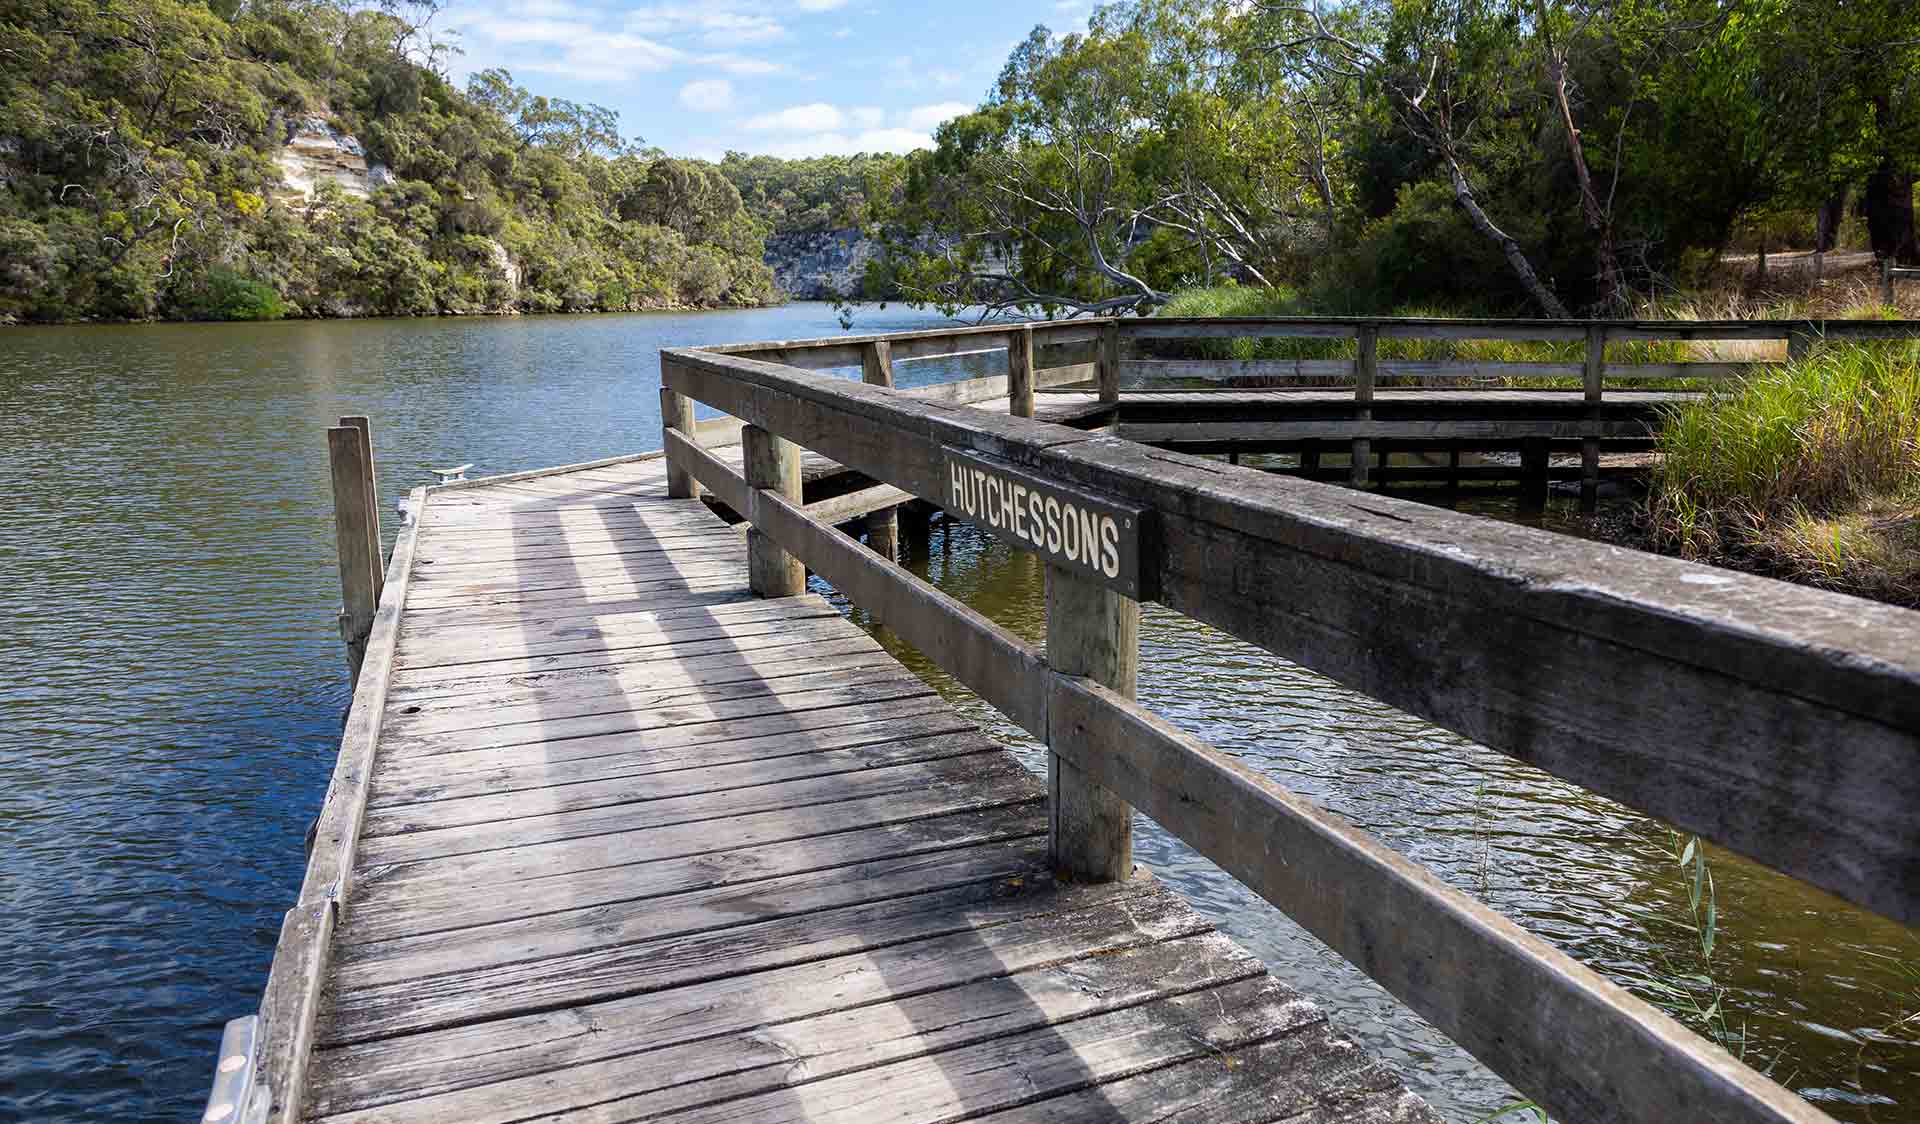 The jetty at Hutchessons Campground at Lower Glenelg National Park